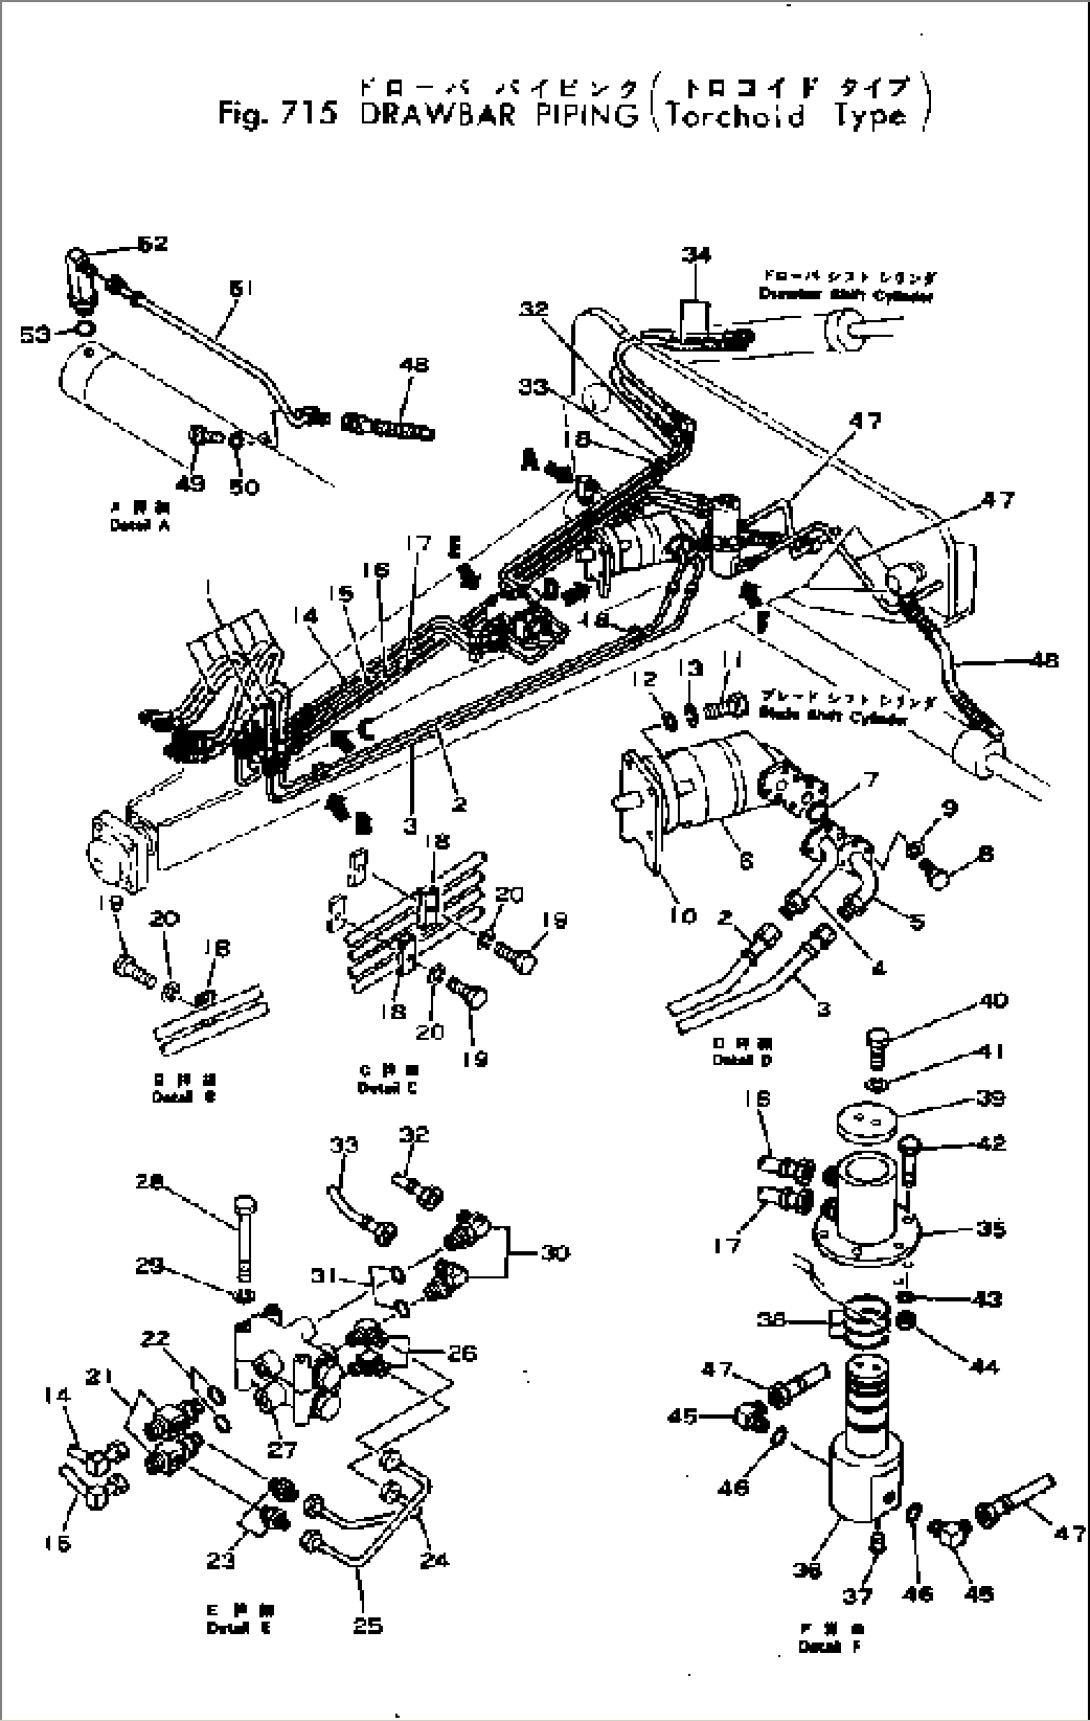 DRAWBER PIPING (FOR TORCHOID TYPE)